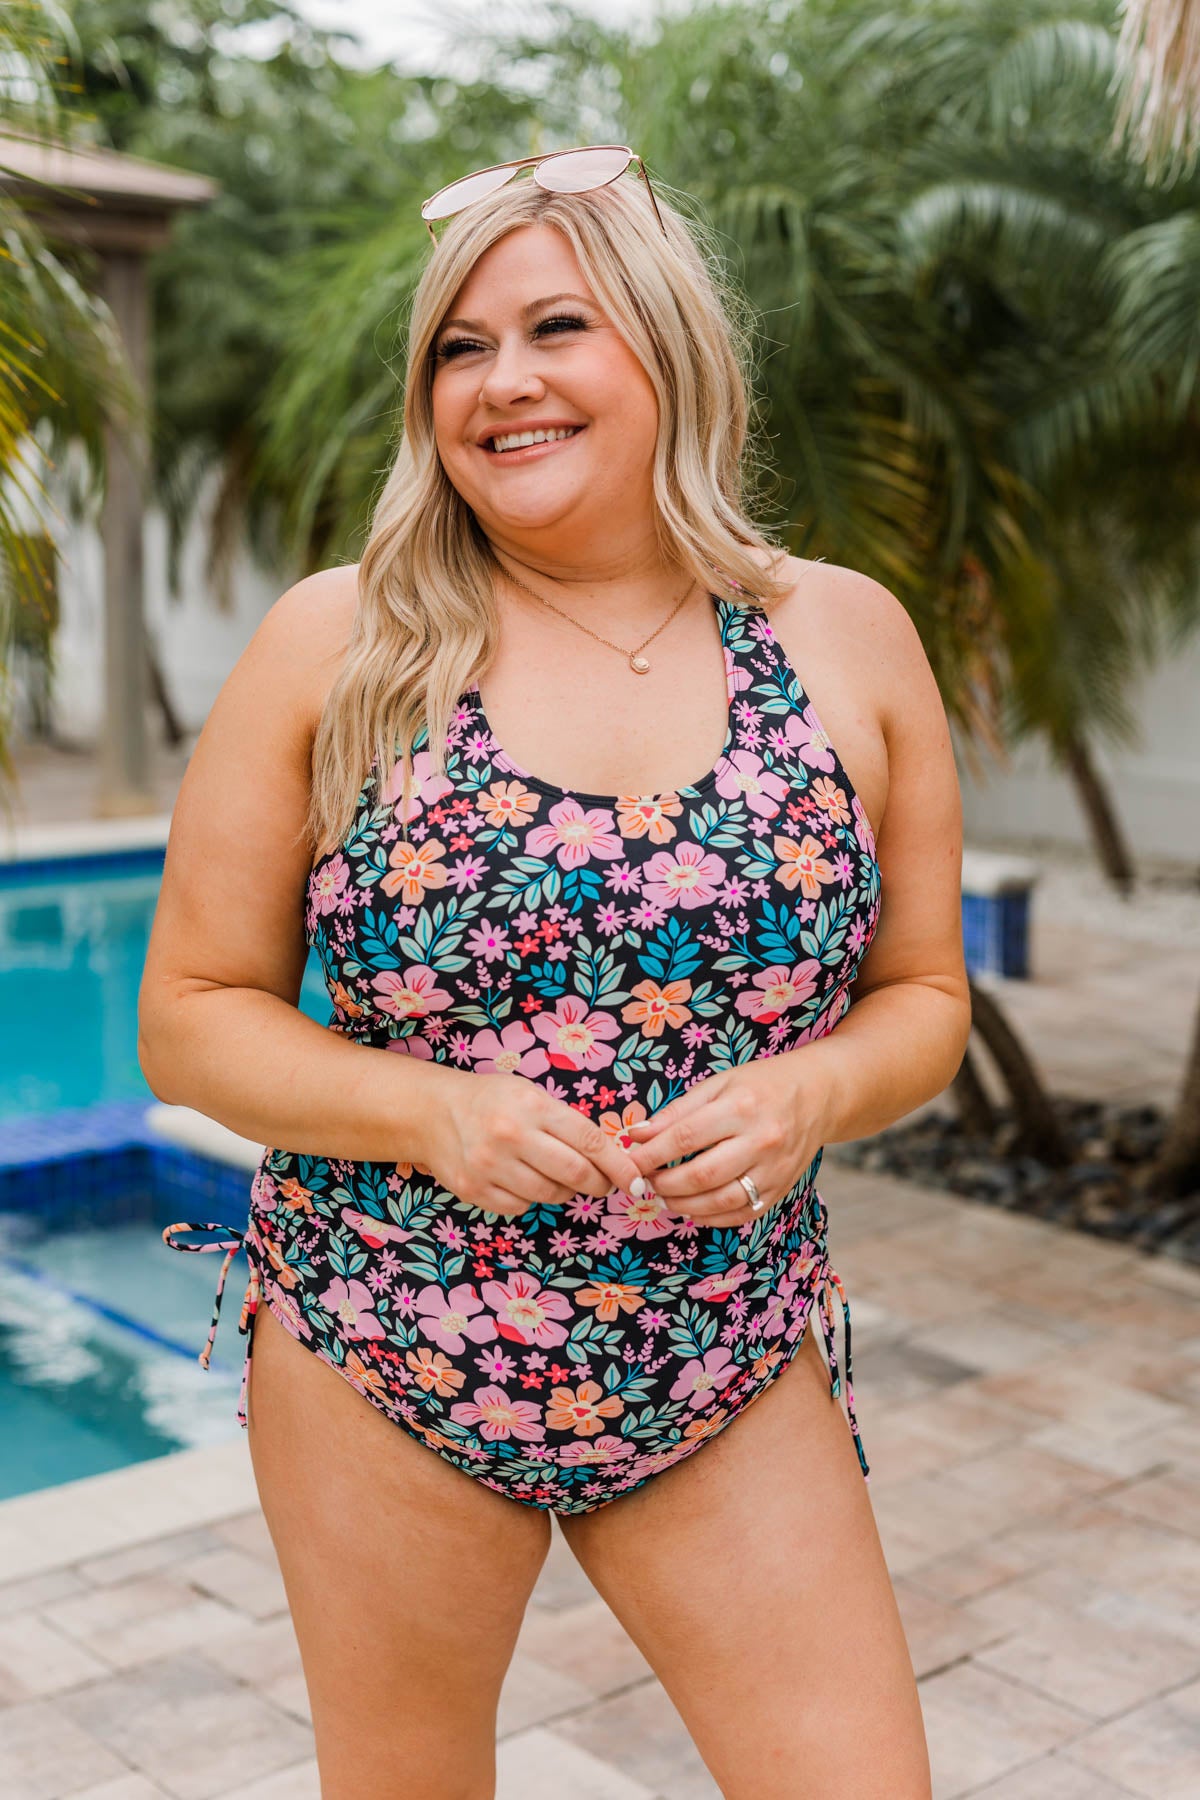 The Beach Is Calling Tankini Swim Top- Black Floral – The Pulse